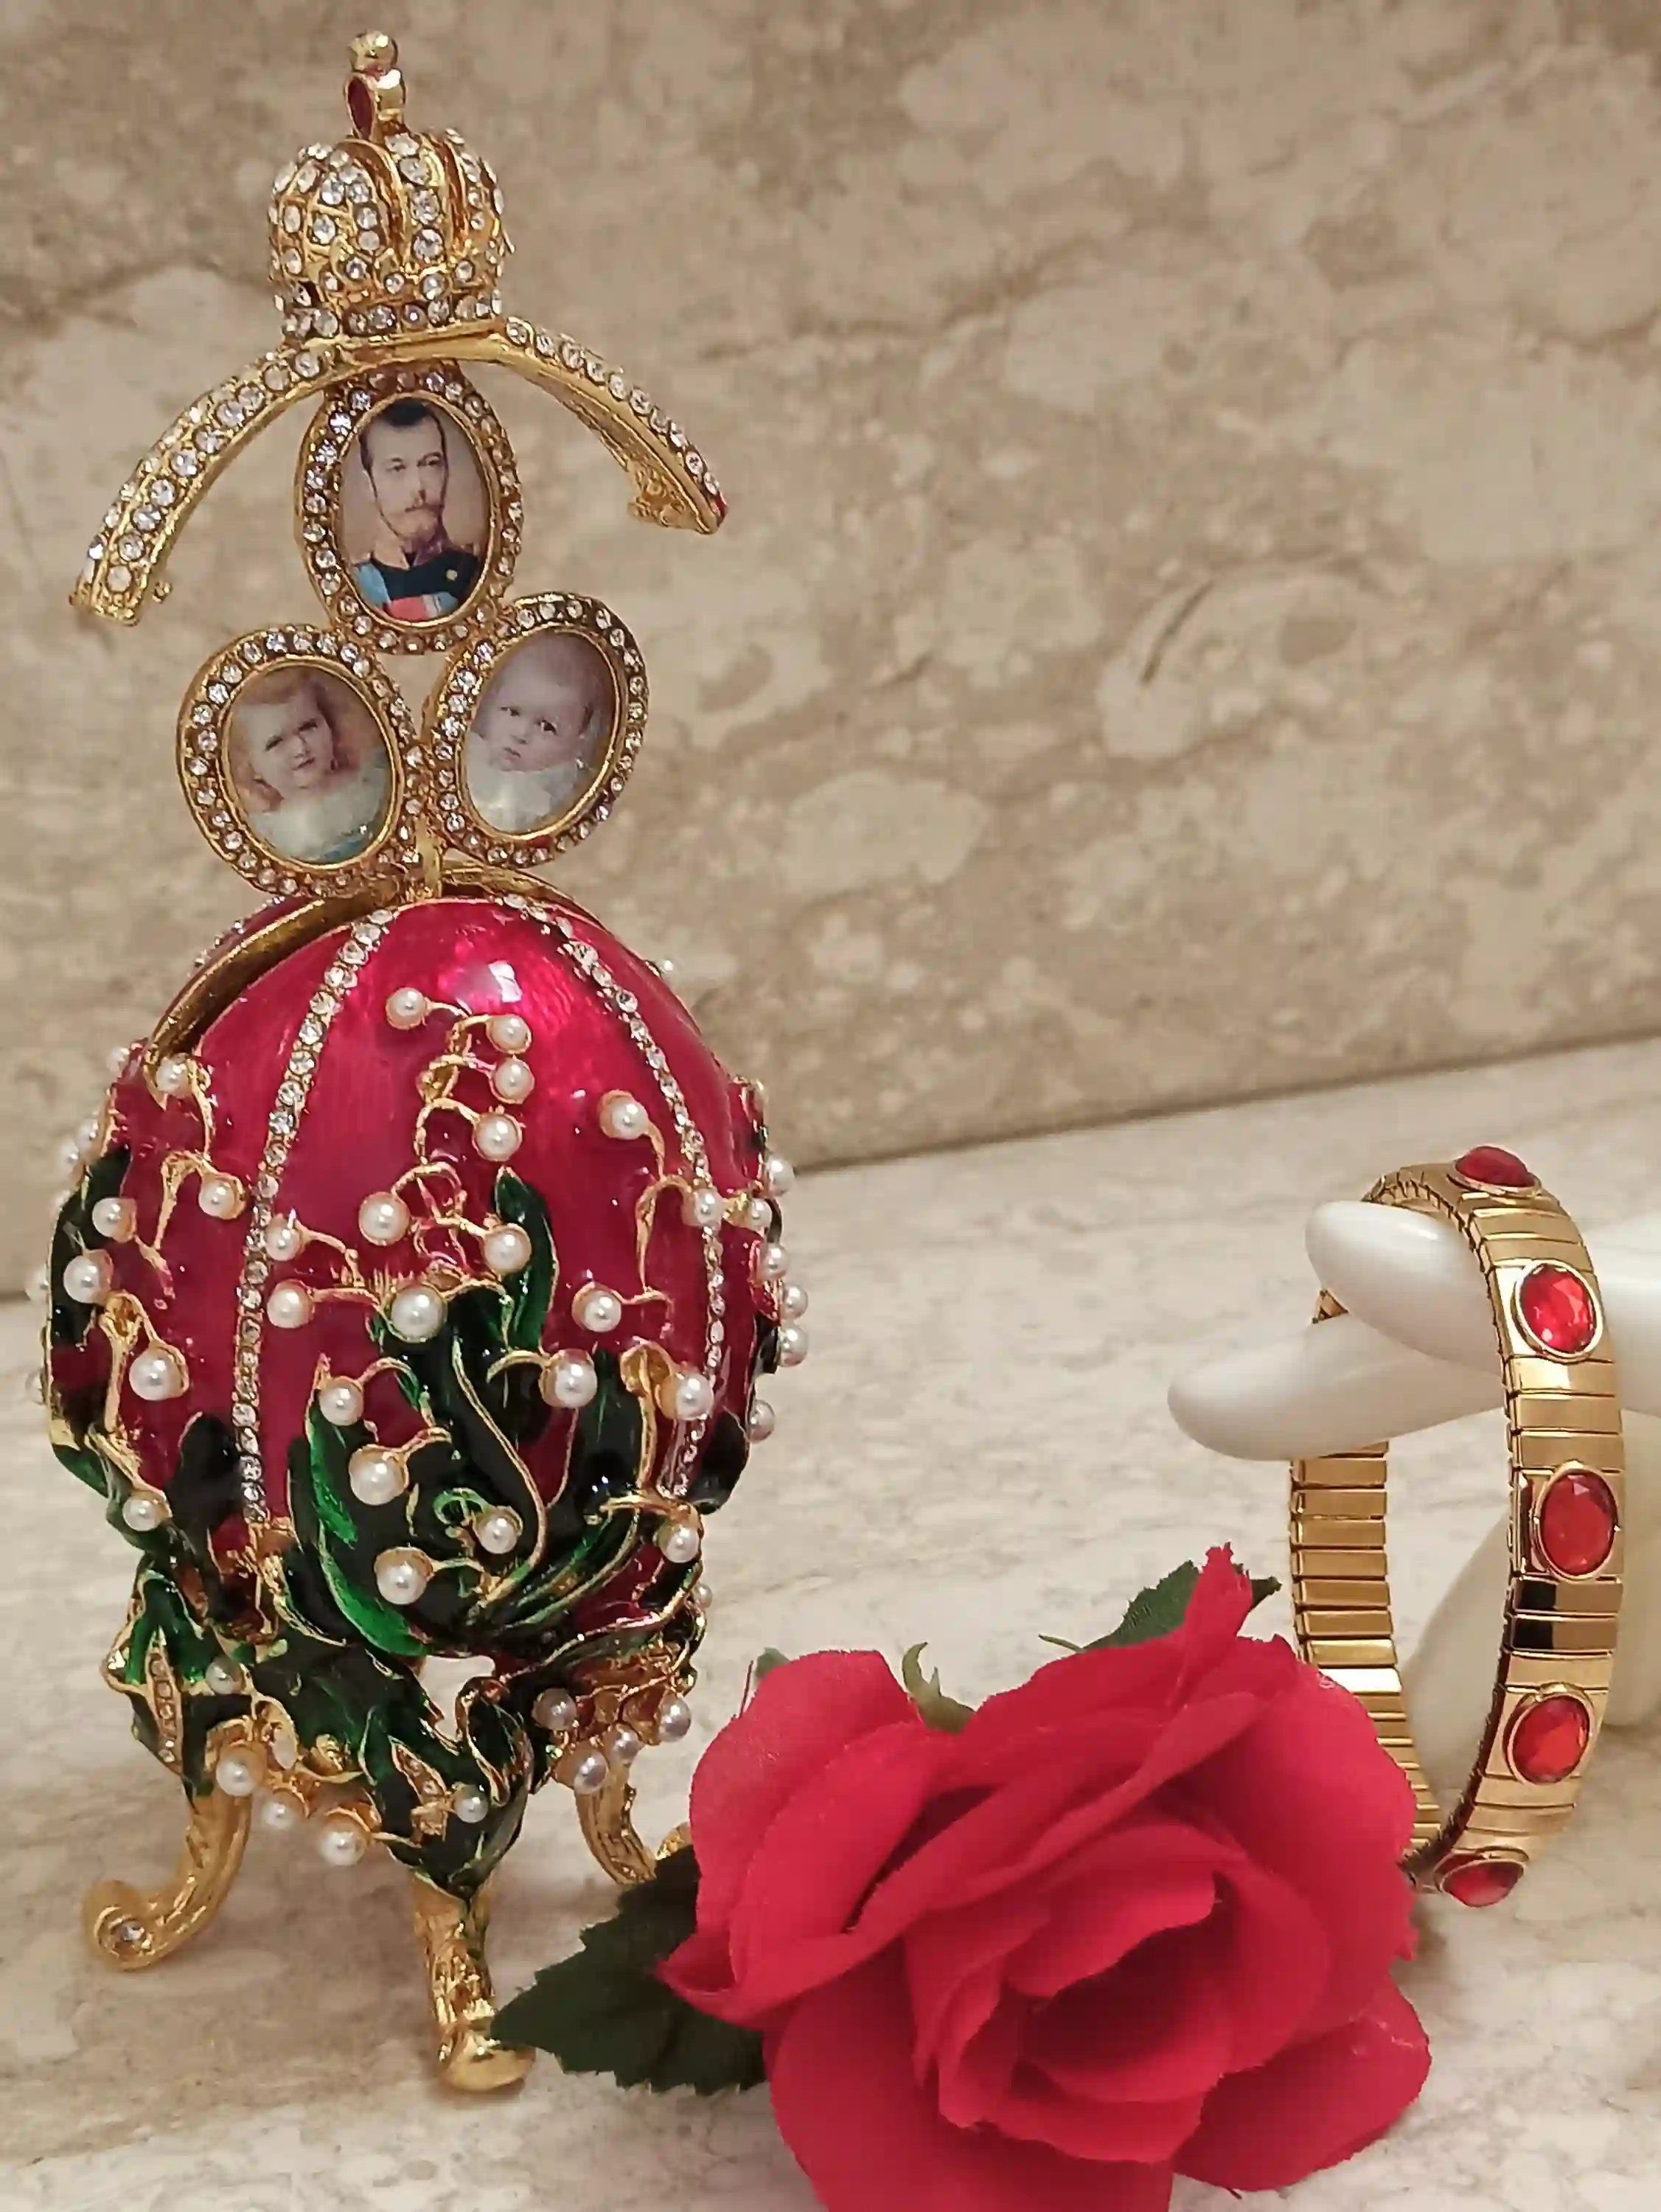 Her Easter Gift EXQUISITE Ornament Easter present Faberge 24k GOLD 